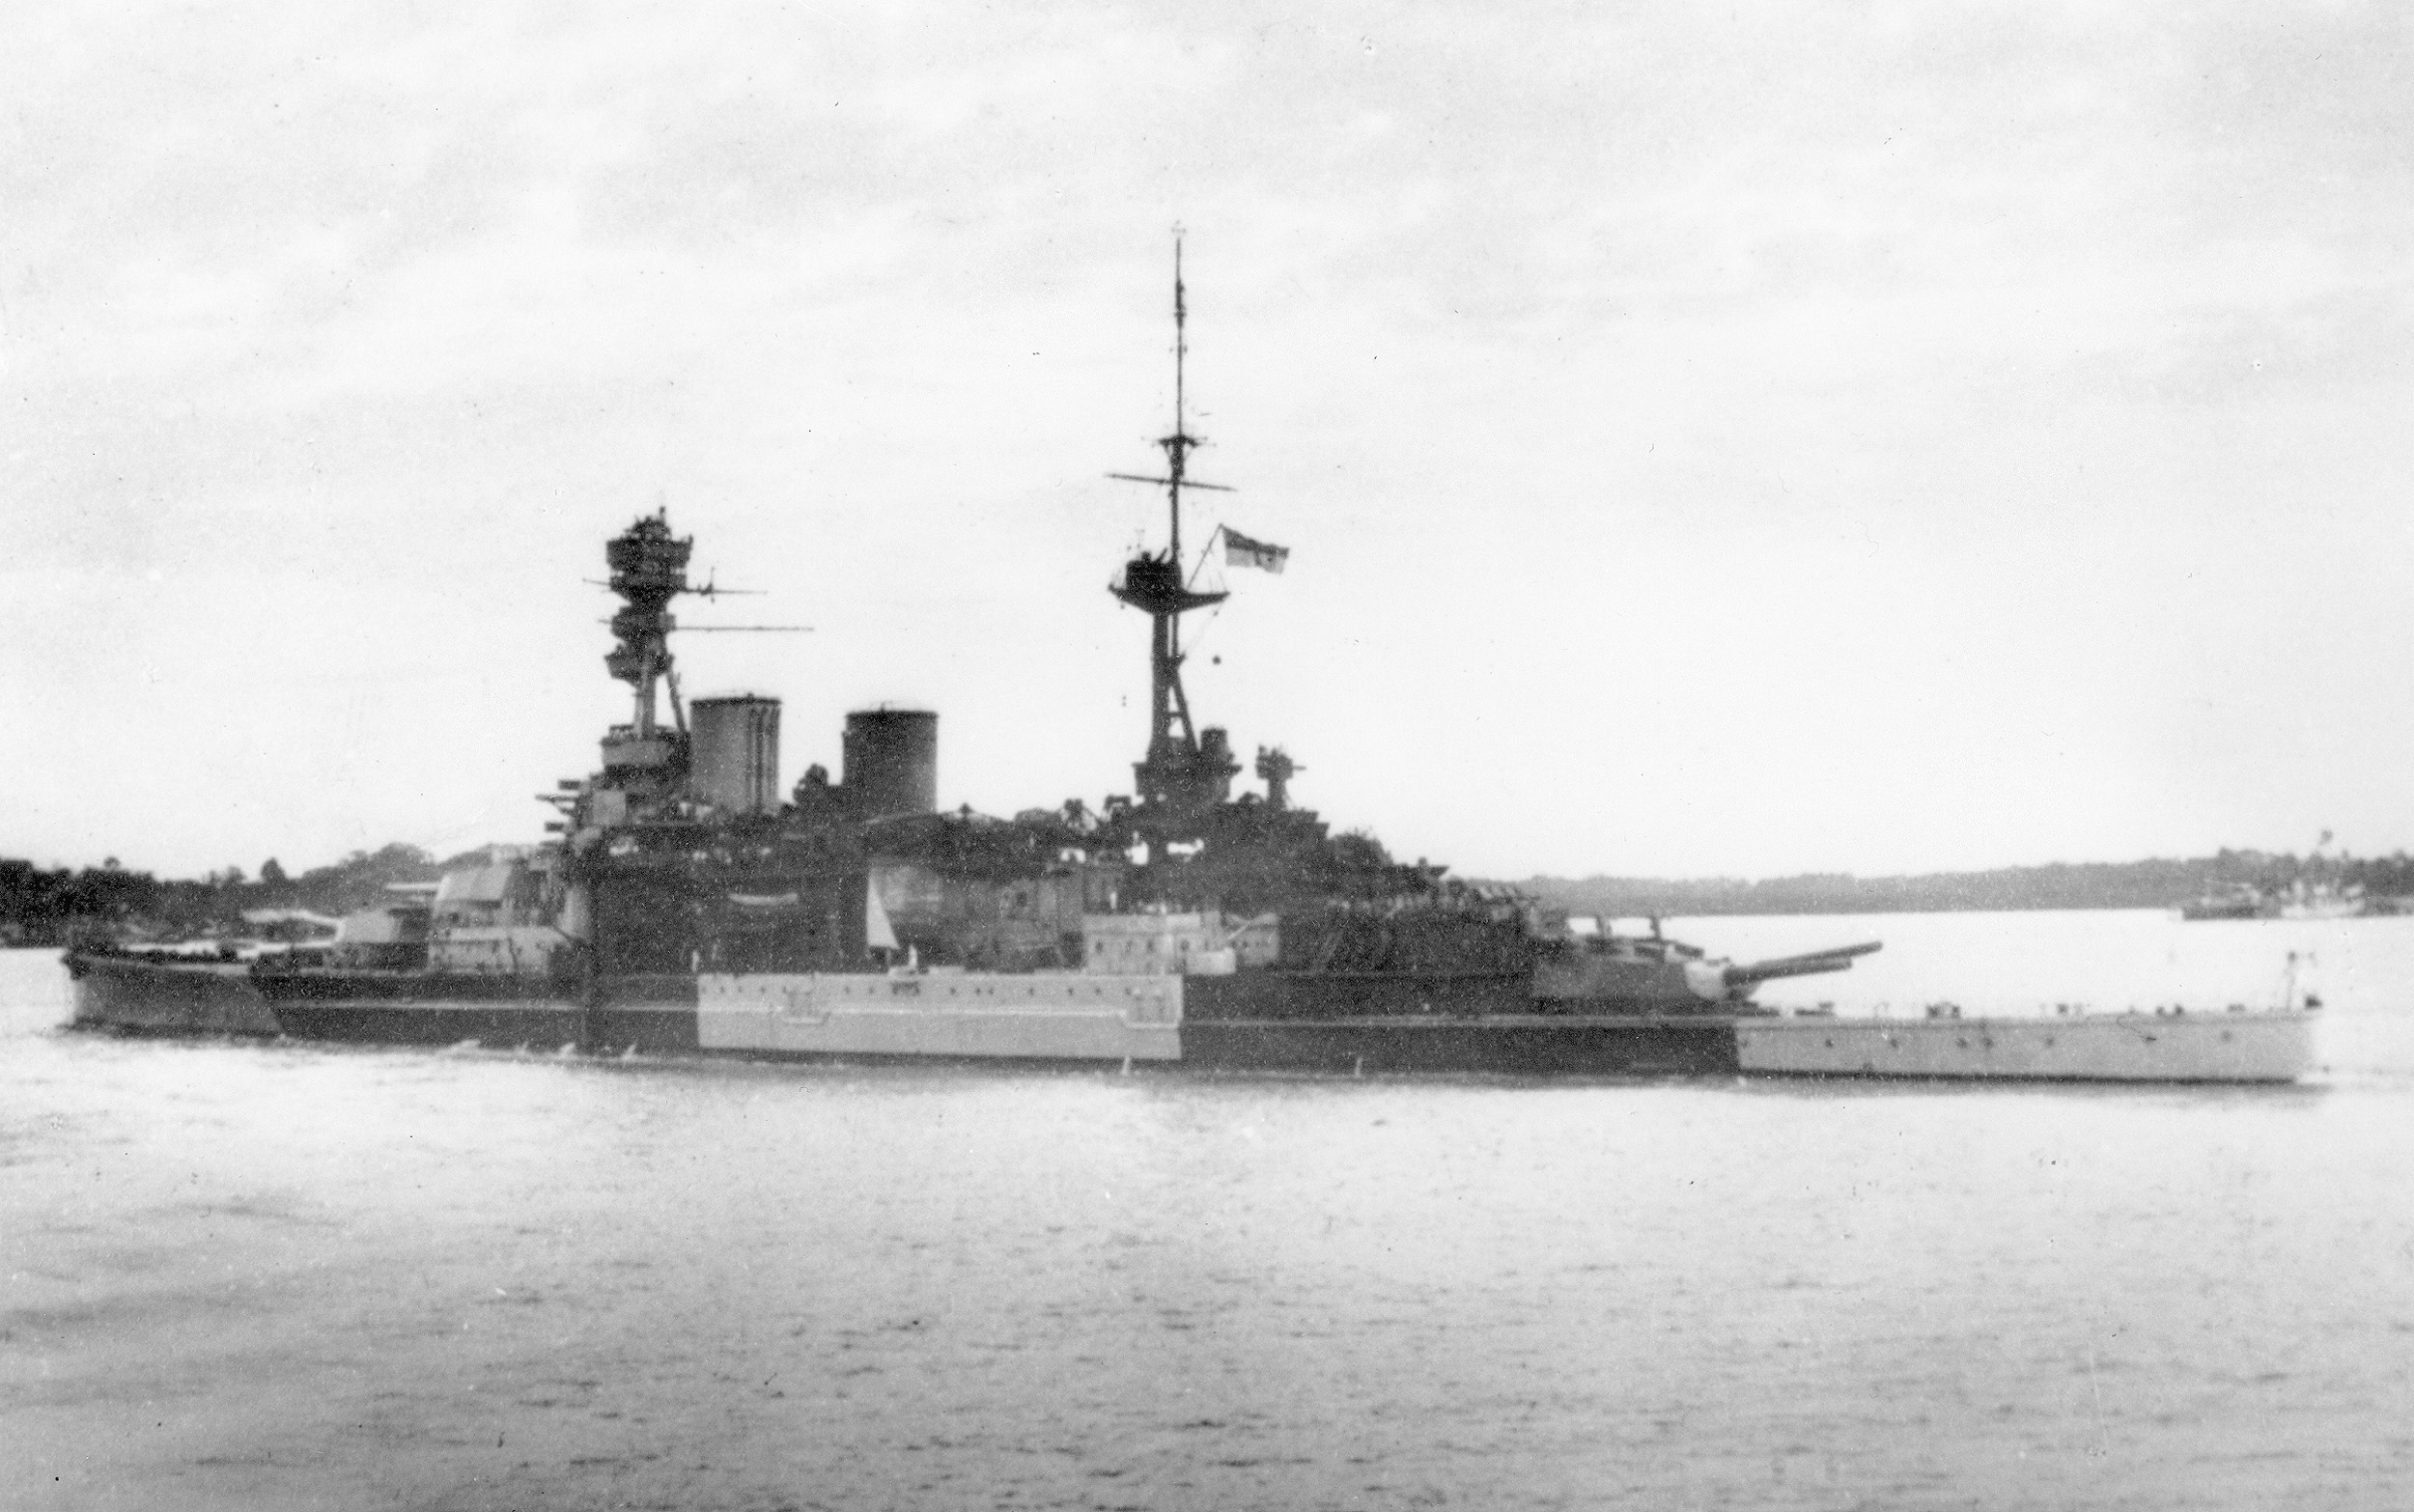 The HMS Repulse in Singapore harbor on the day it set sail to thwart Japanese landings up the peninsula.